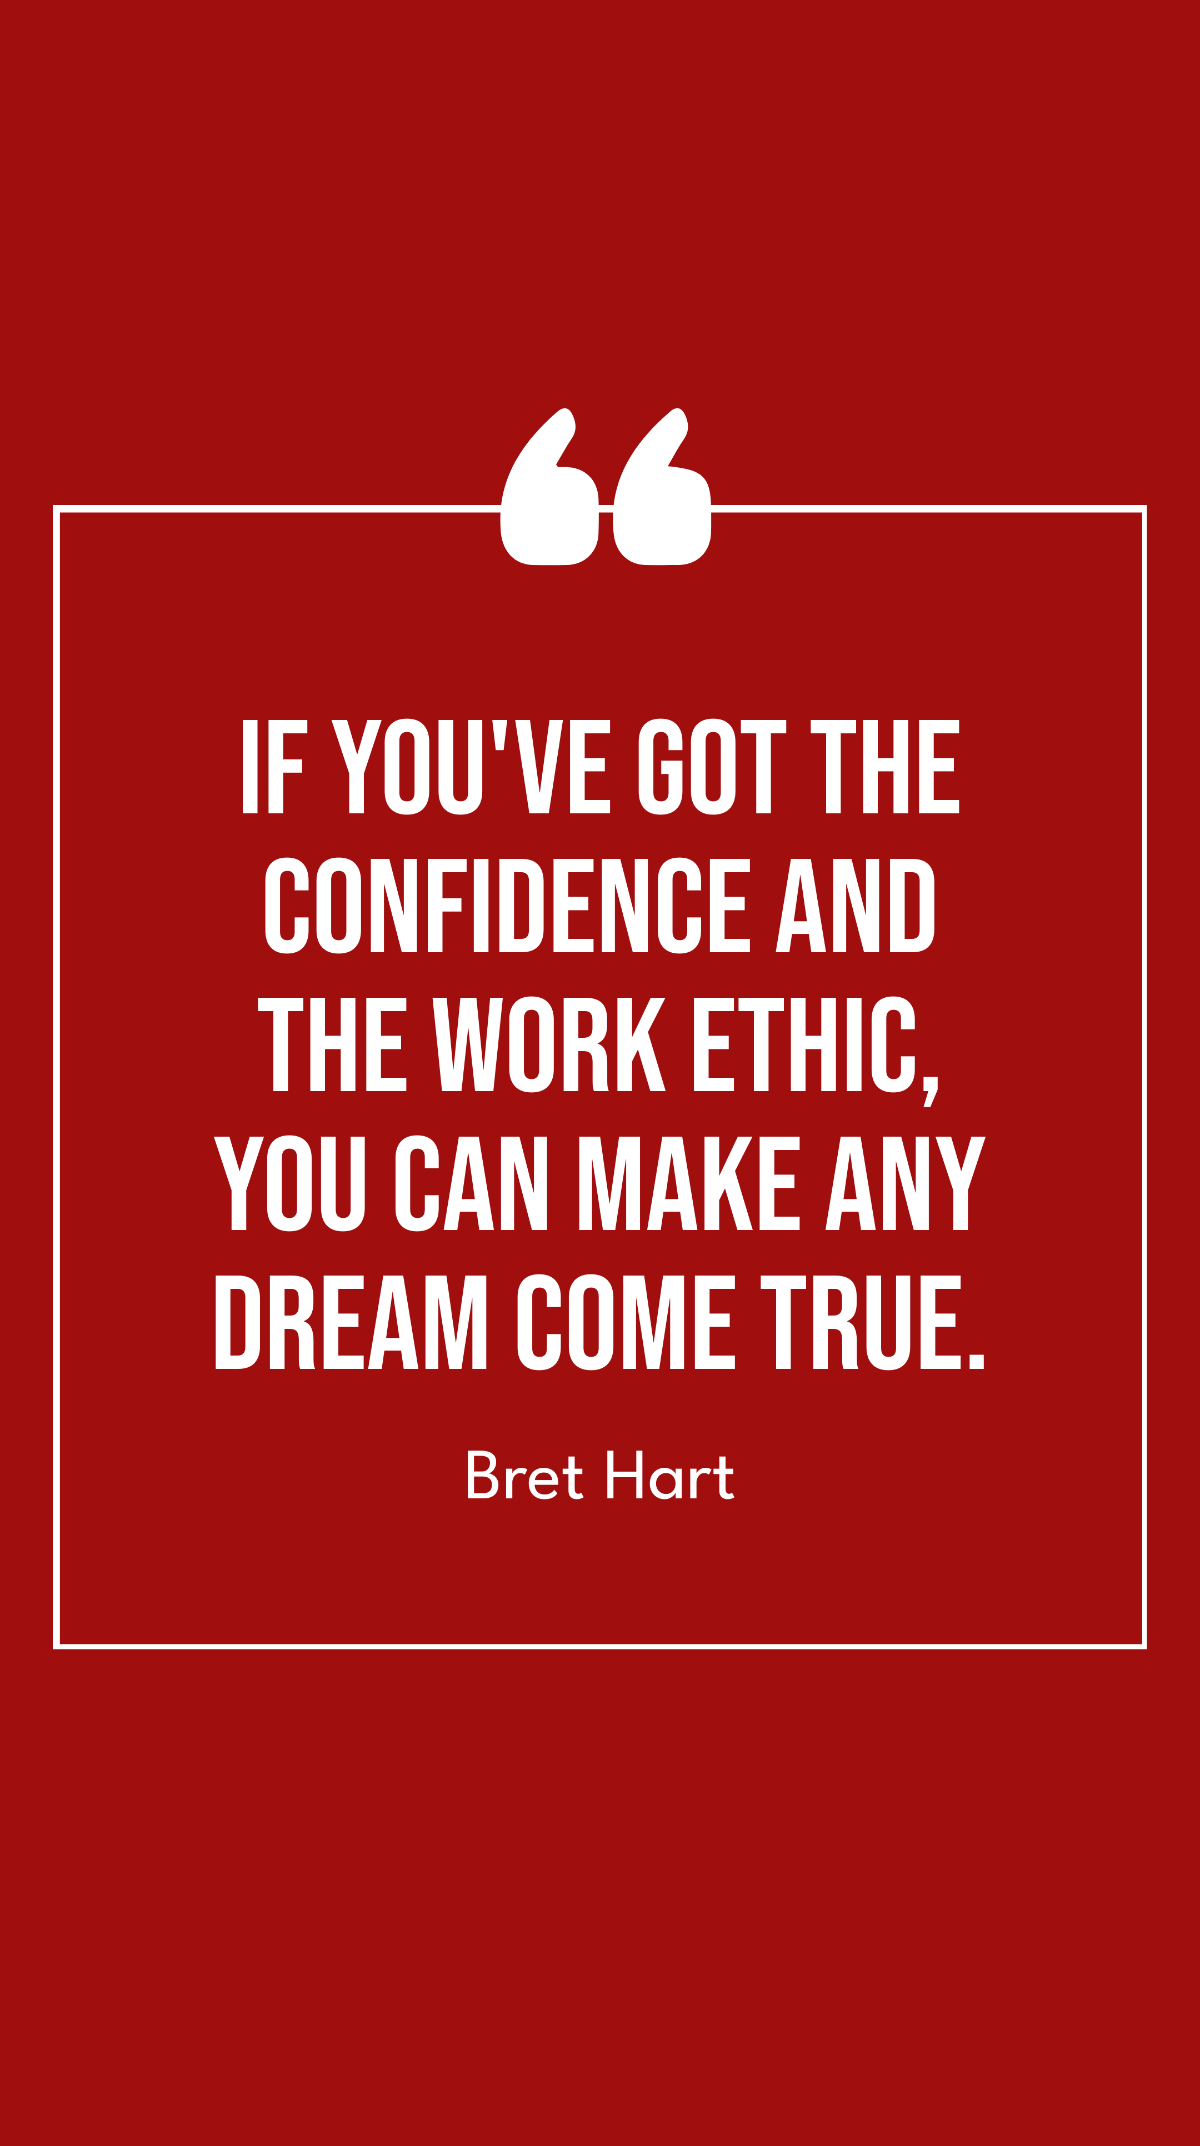 Bret Hart - If you've got the confidence and the work ethic, you can make any dream come true. Template